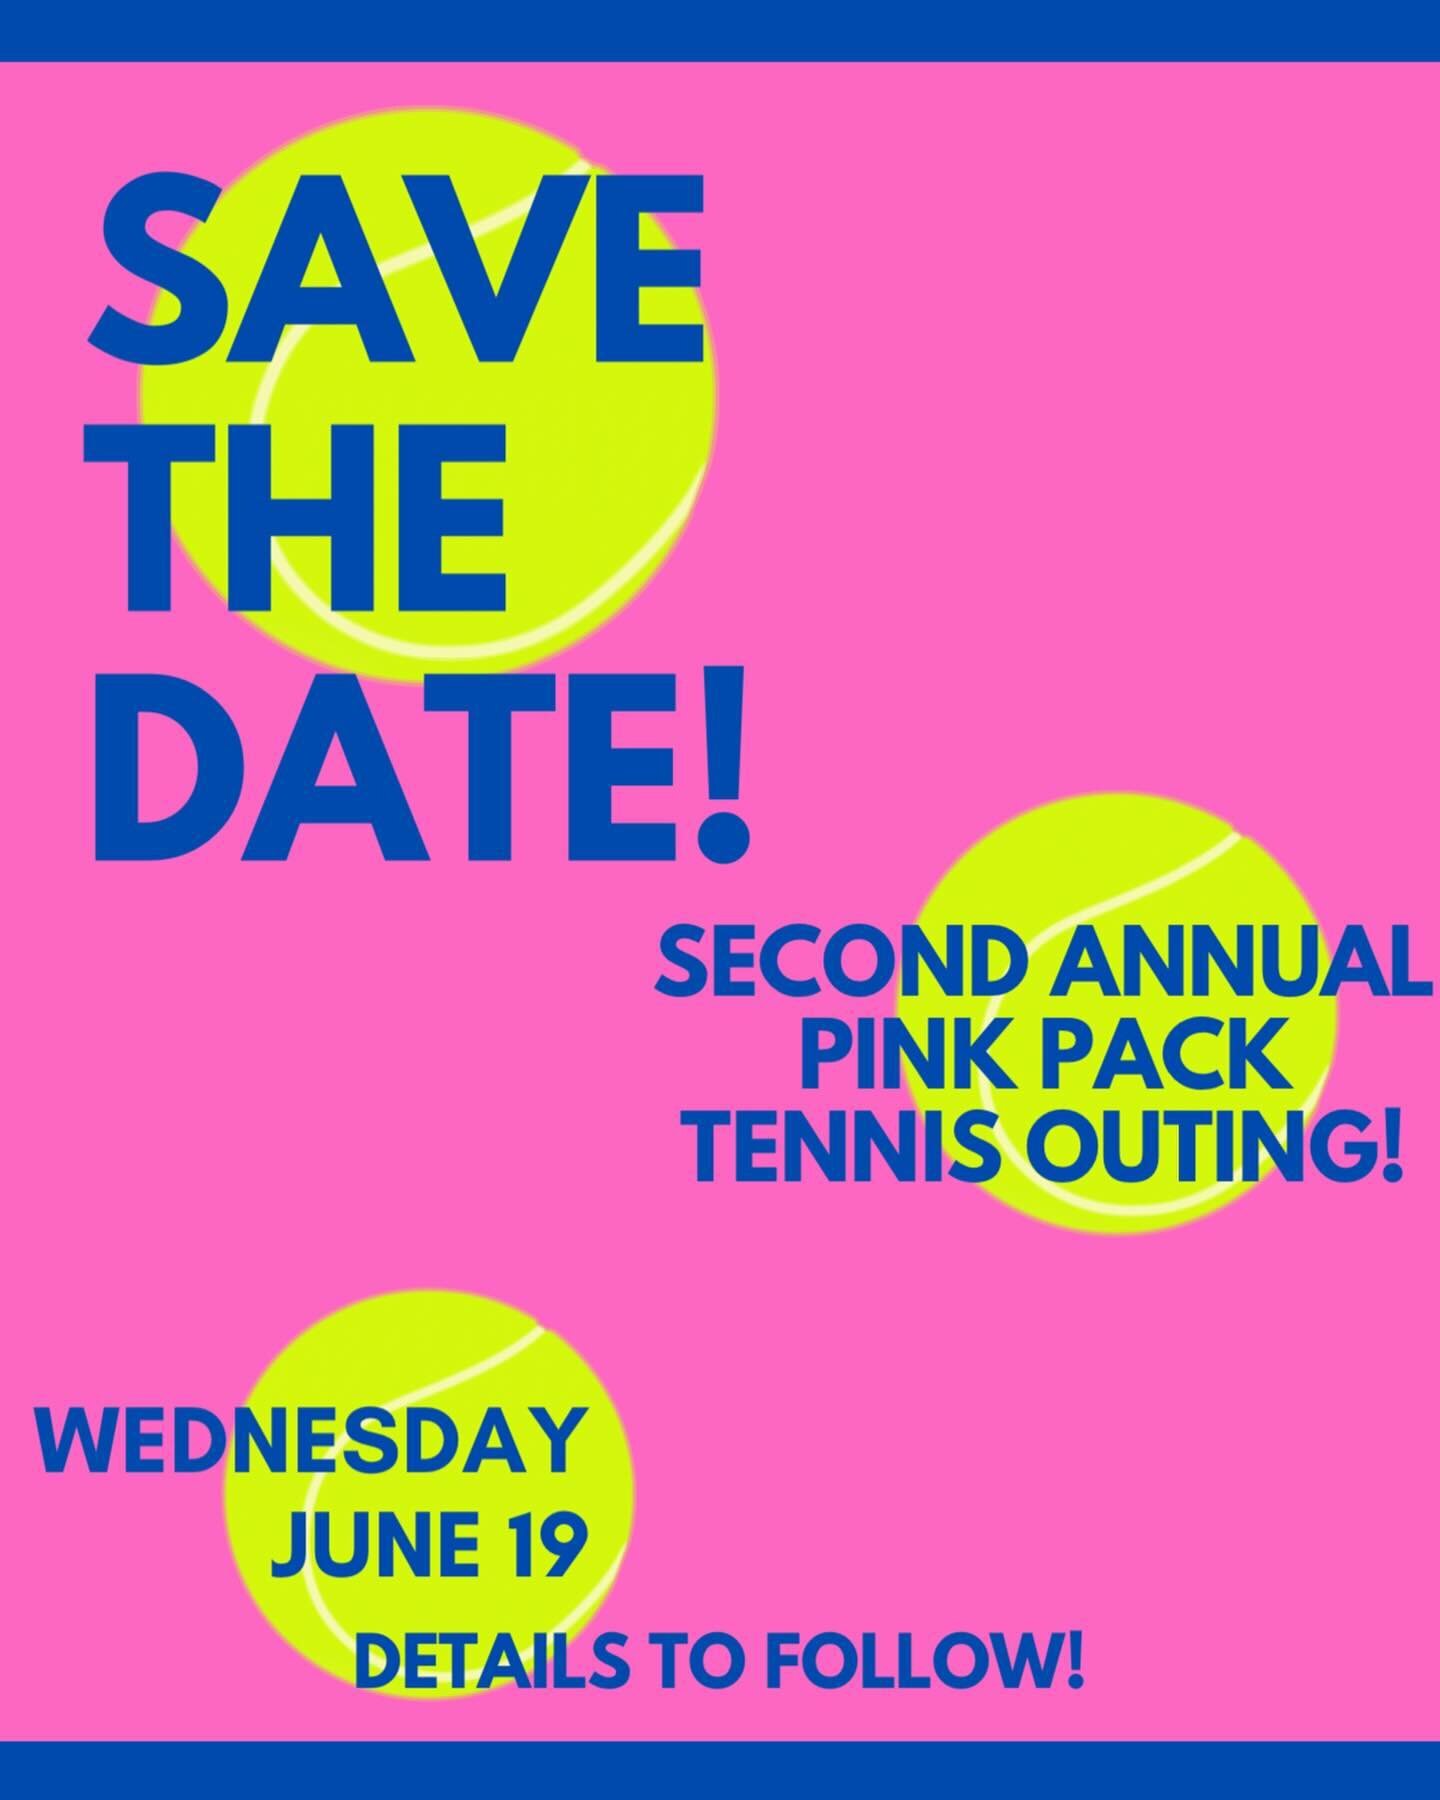 Save the date June 19th!! Can&rsquo;t wait for our second annual tennis fundraiser this year! Stay tuned for more details🎾🩷